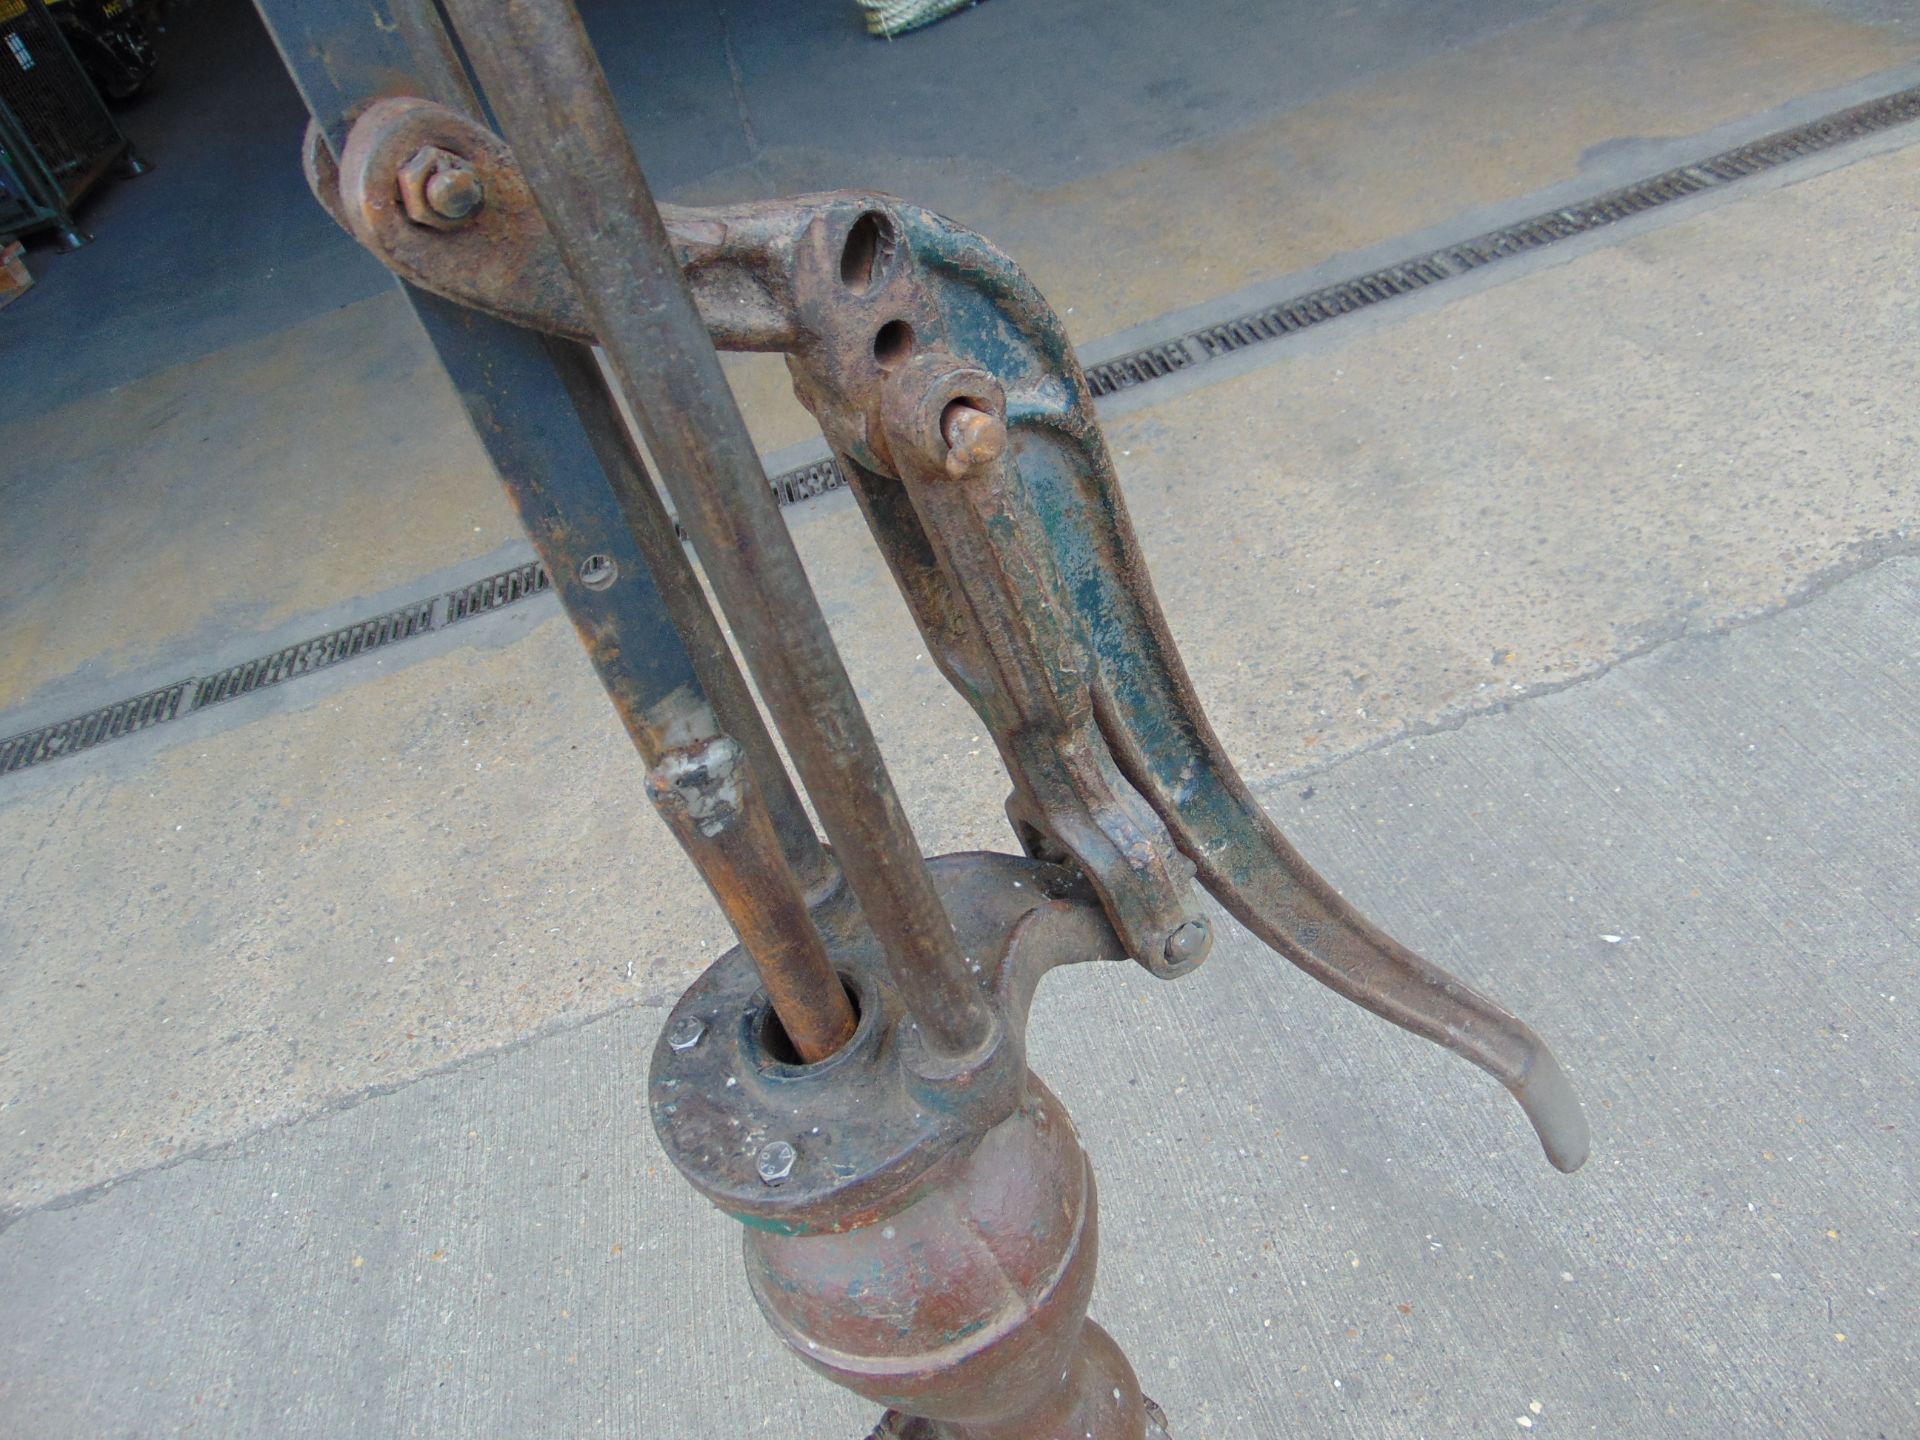 Genuine Anitique Full Size Cast Iron Water Pump - Image 3 of 6